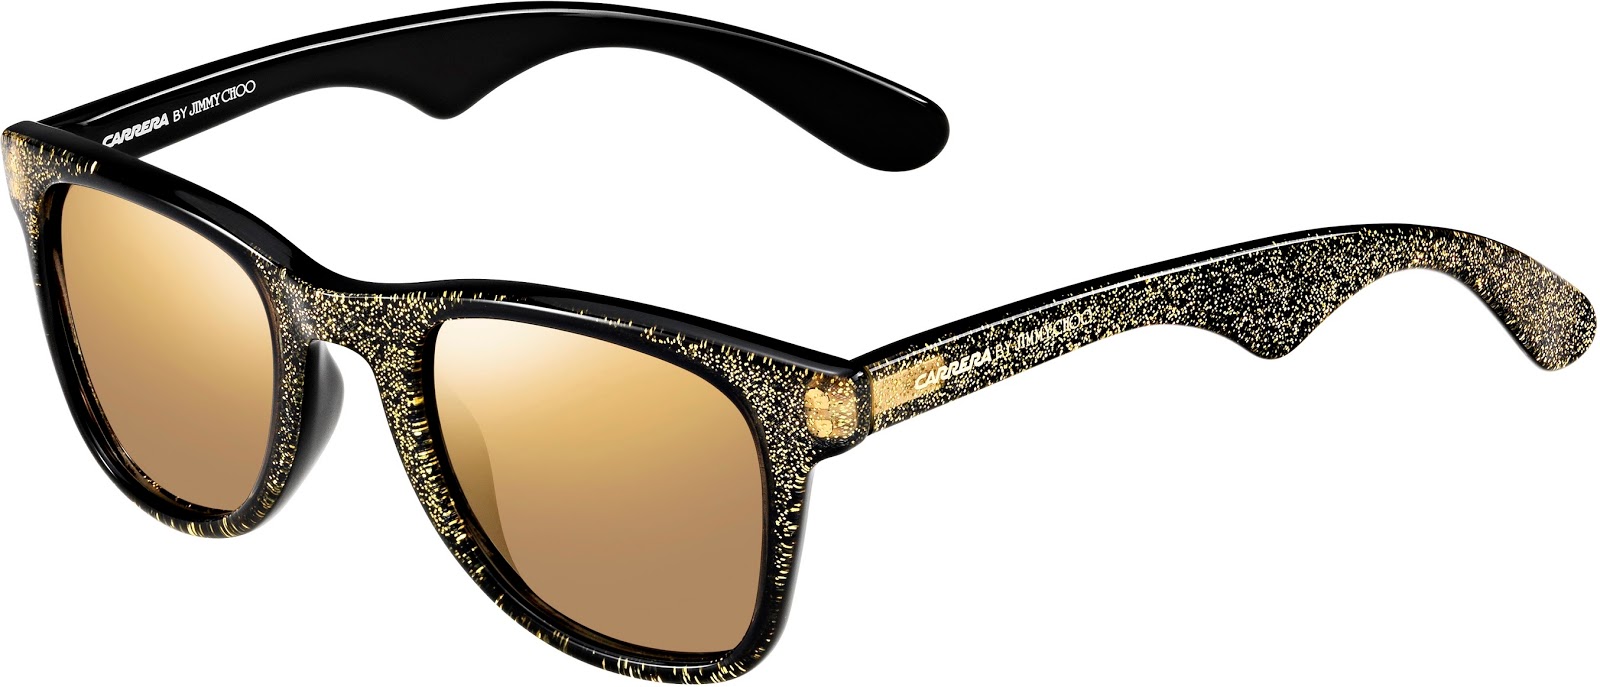 wife insect B.C. Carrera by Jimmy Choo Sunglasses